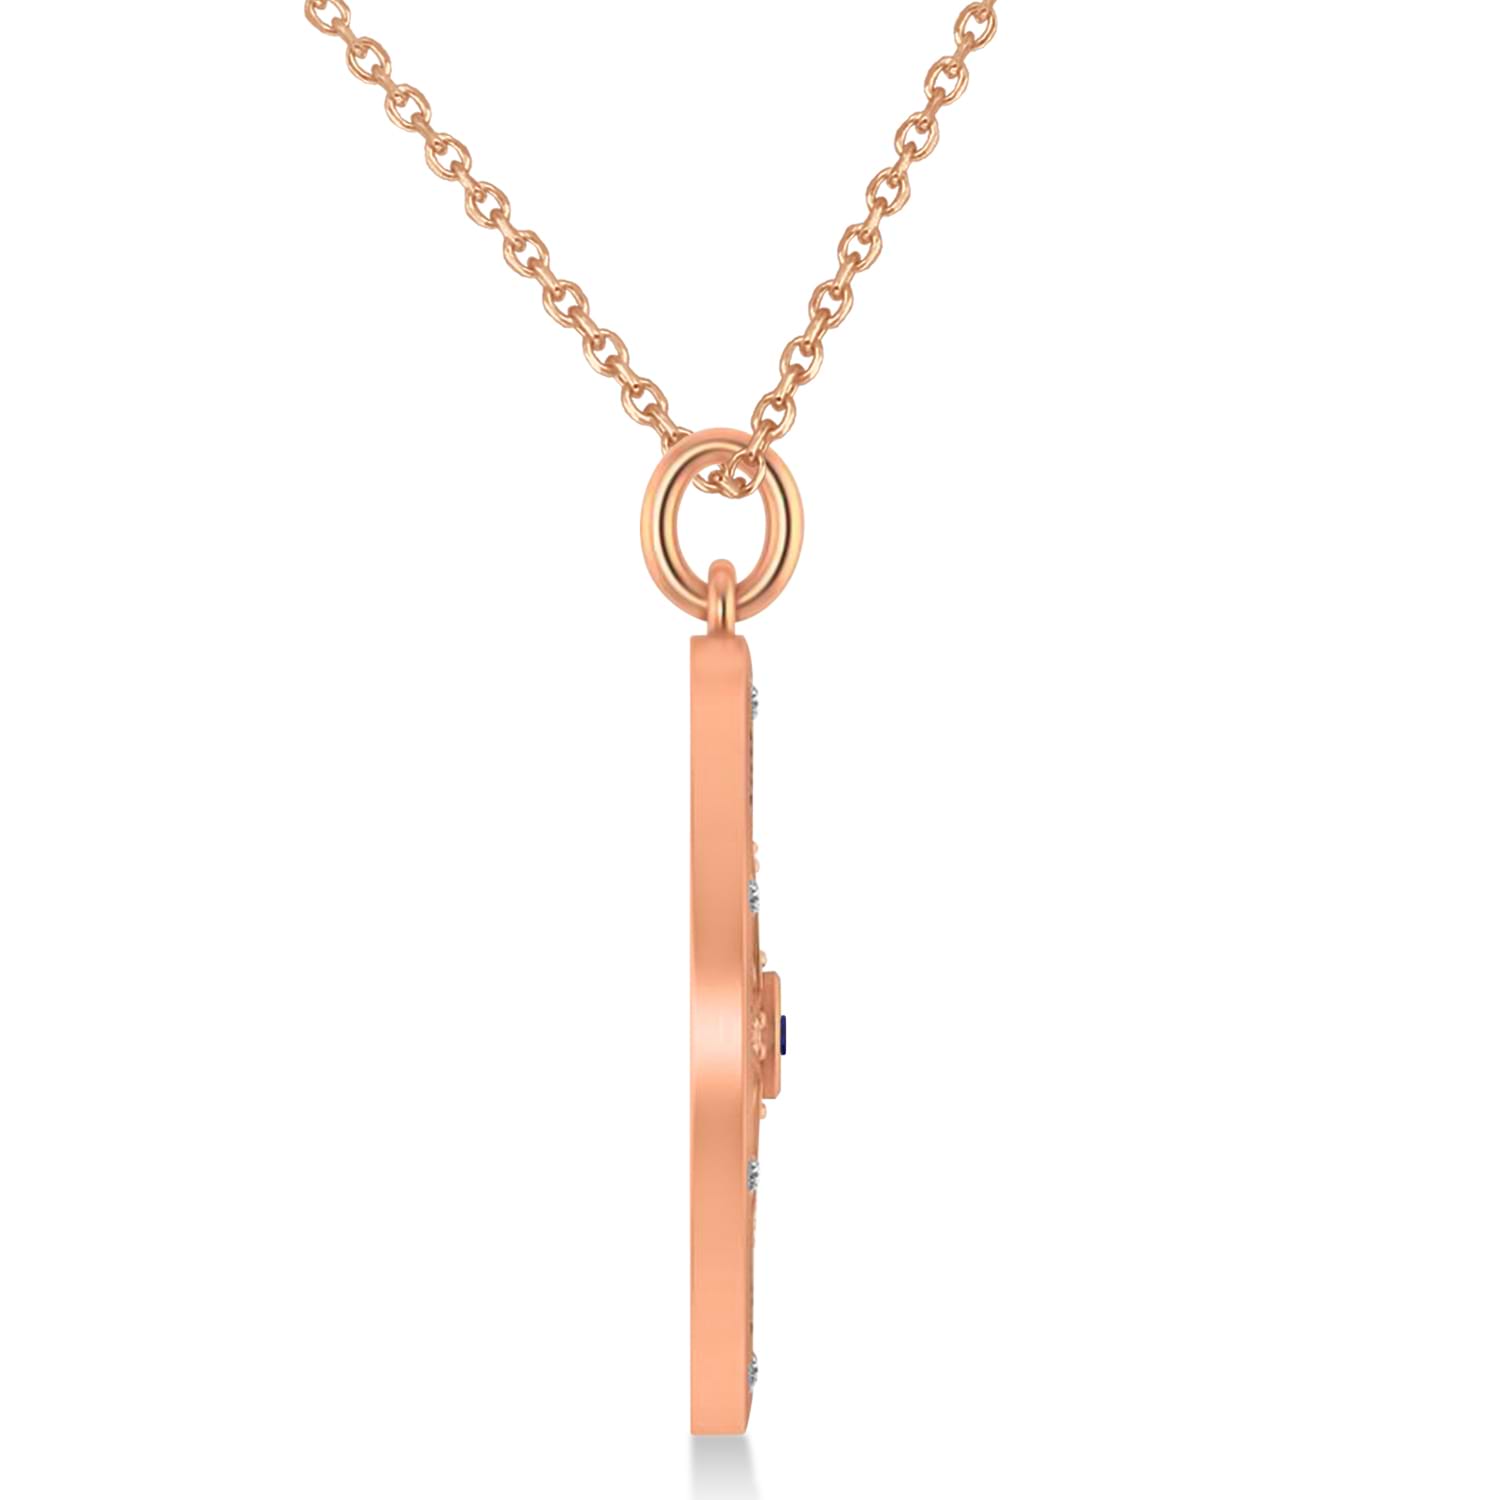 18k Rose Gold Chain For Men With Price - Candere by Kalyan Jewellers.